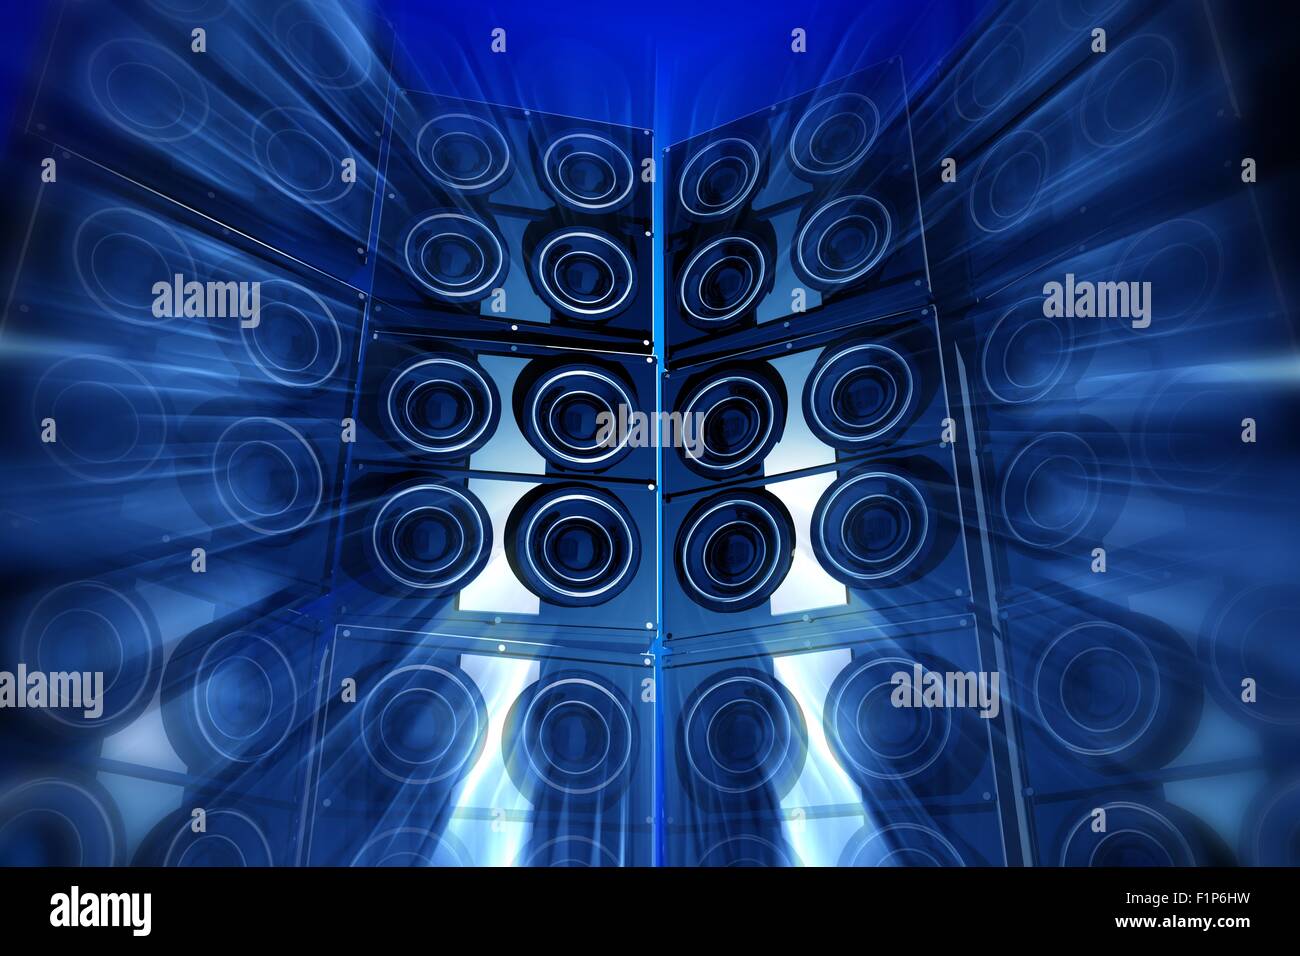 Loudness Party. Performance Theme with Large Bass Speakers and Motion Blur Effect. Blue Tones. Perfect for Techno Party Flyers e Stock Photo